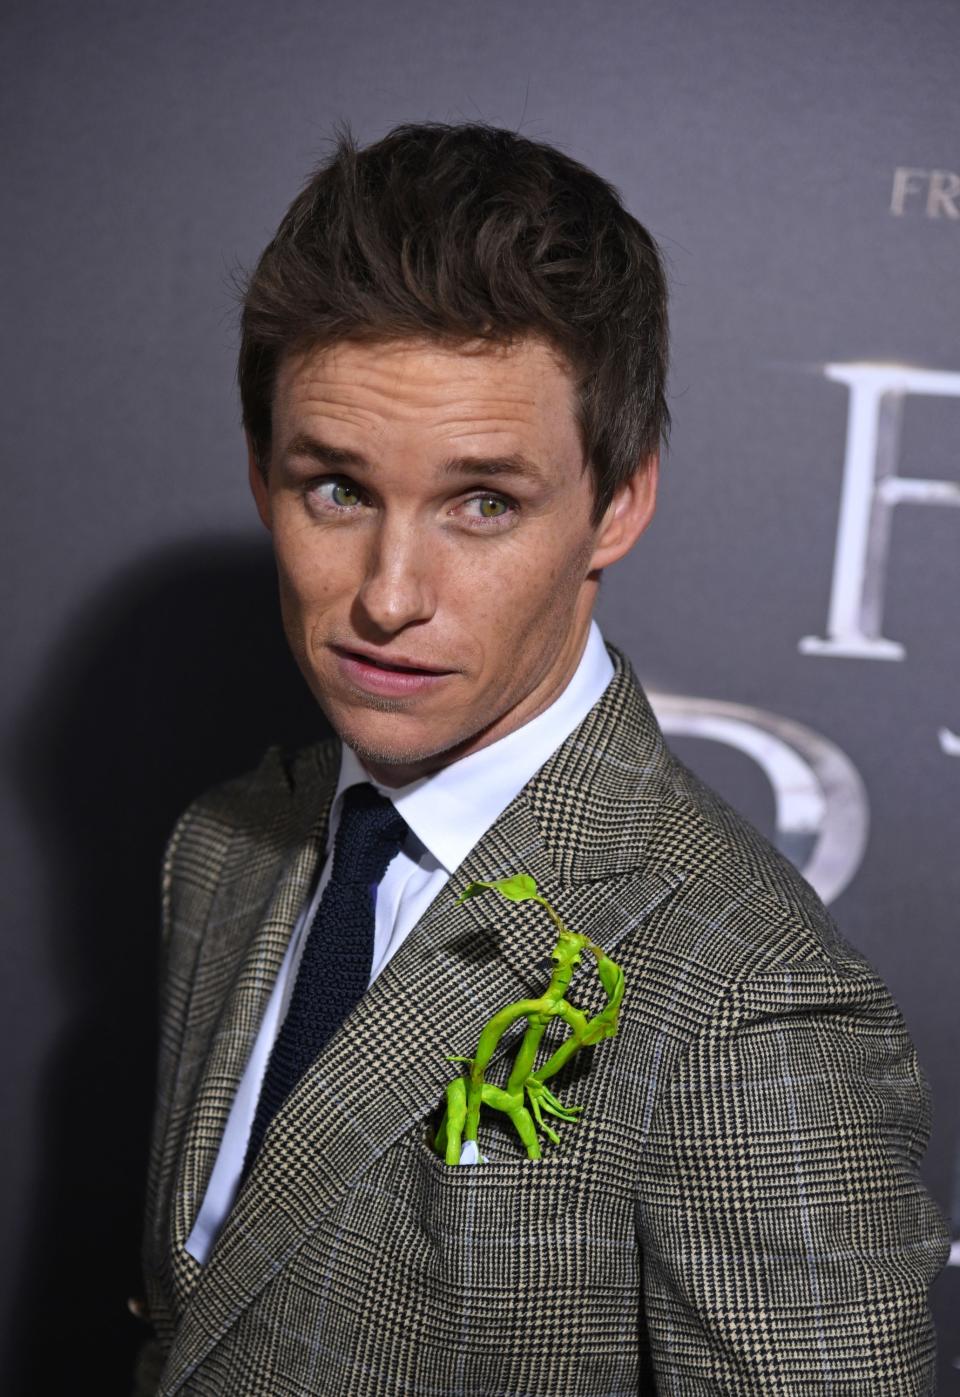 Eddie poses at a red carpet event with a toy version of the Bowtruckle, a fantastical beast, in his jacket pocket